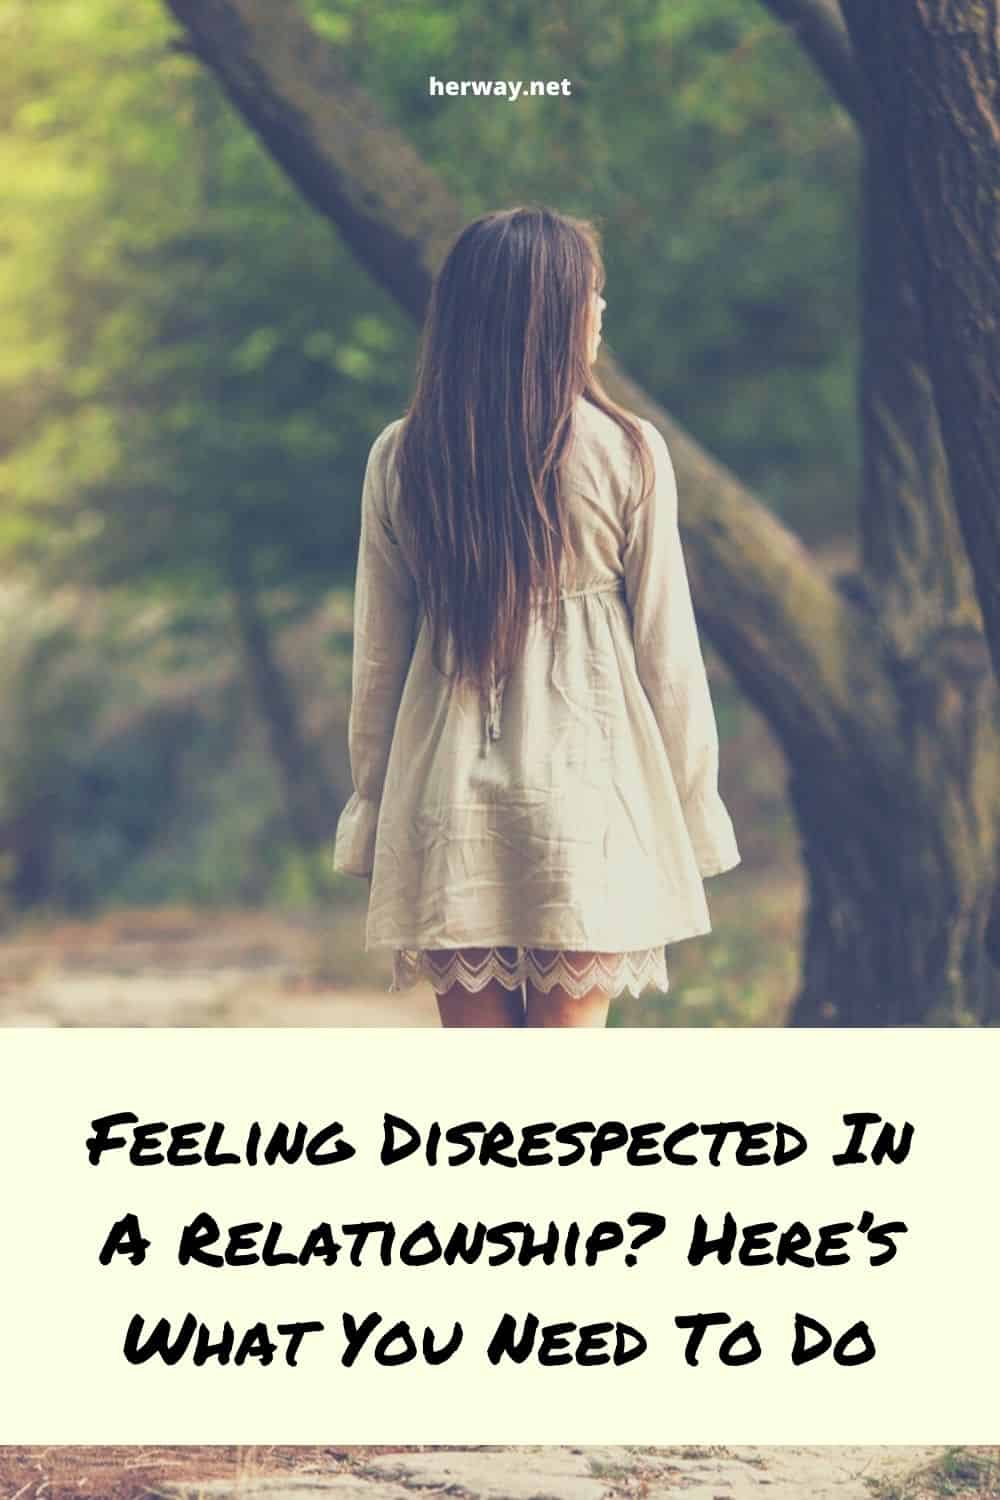 Feeling Disrespected In A Relationship Here’s What You Need To Do